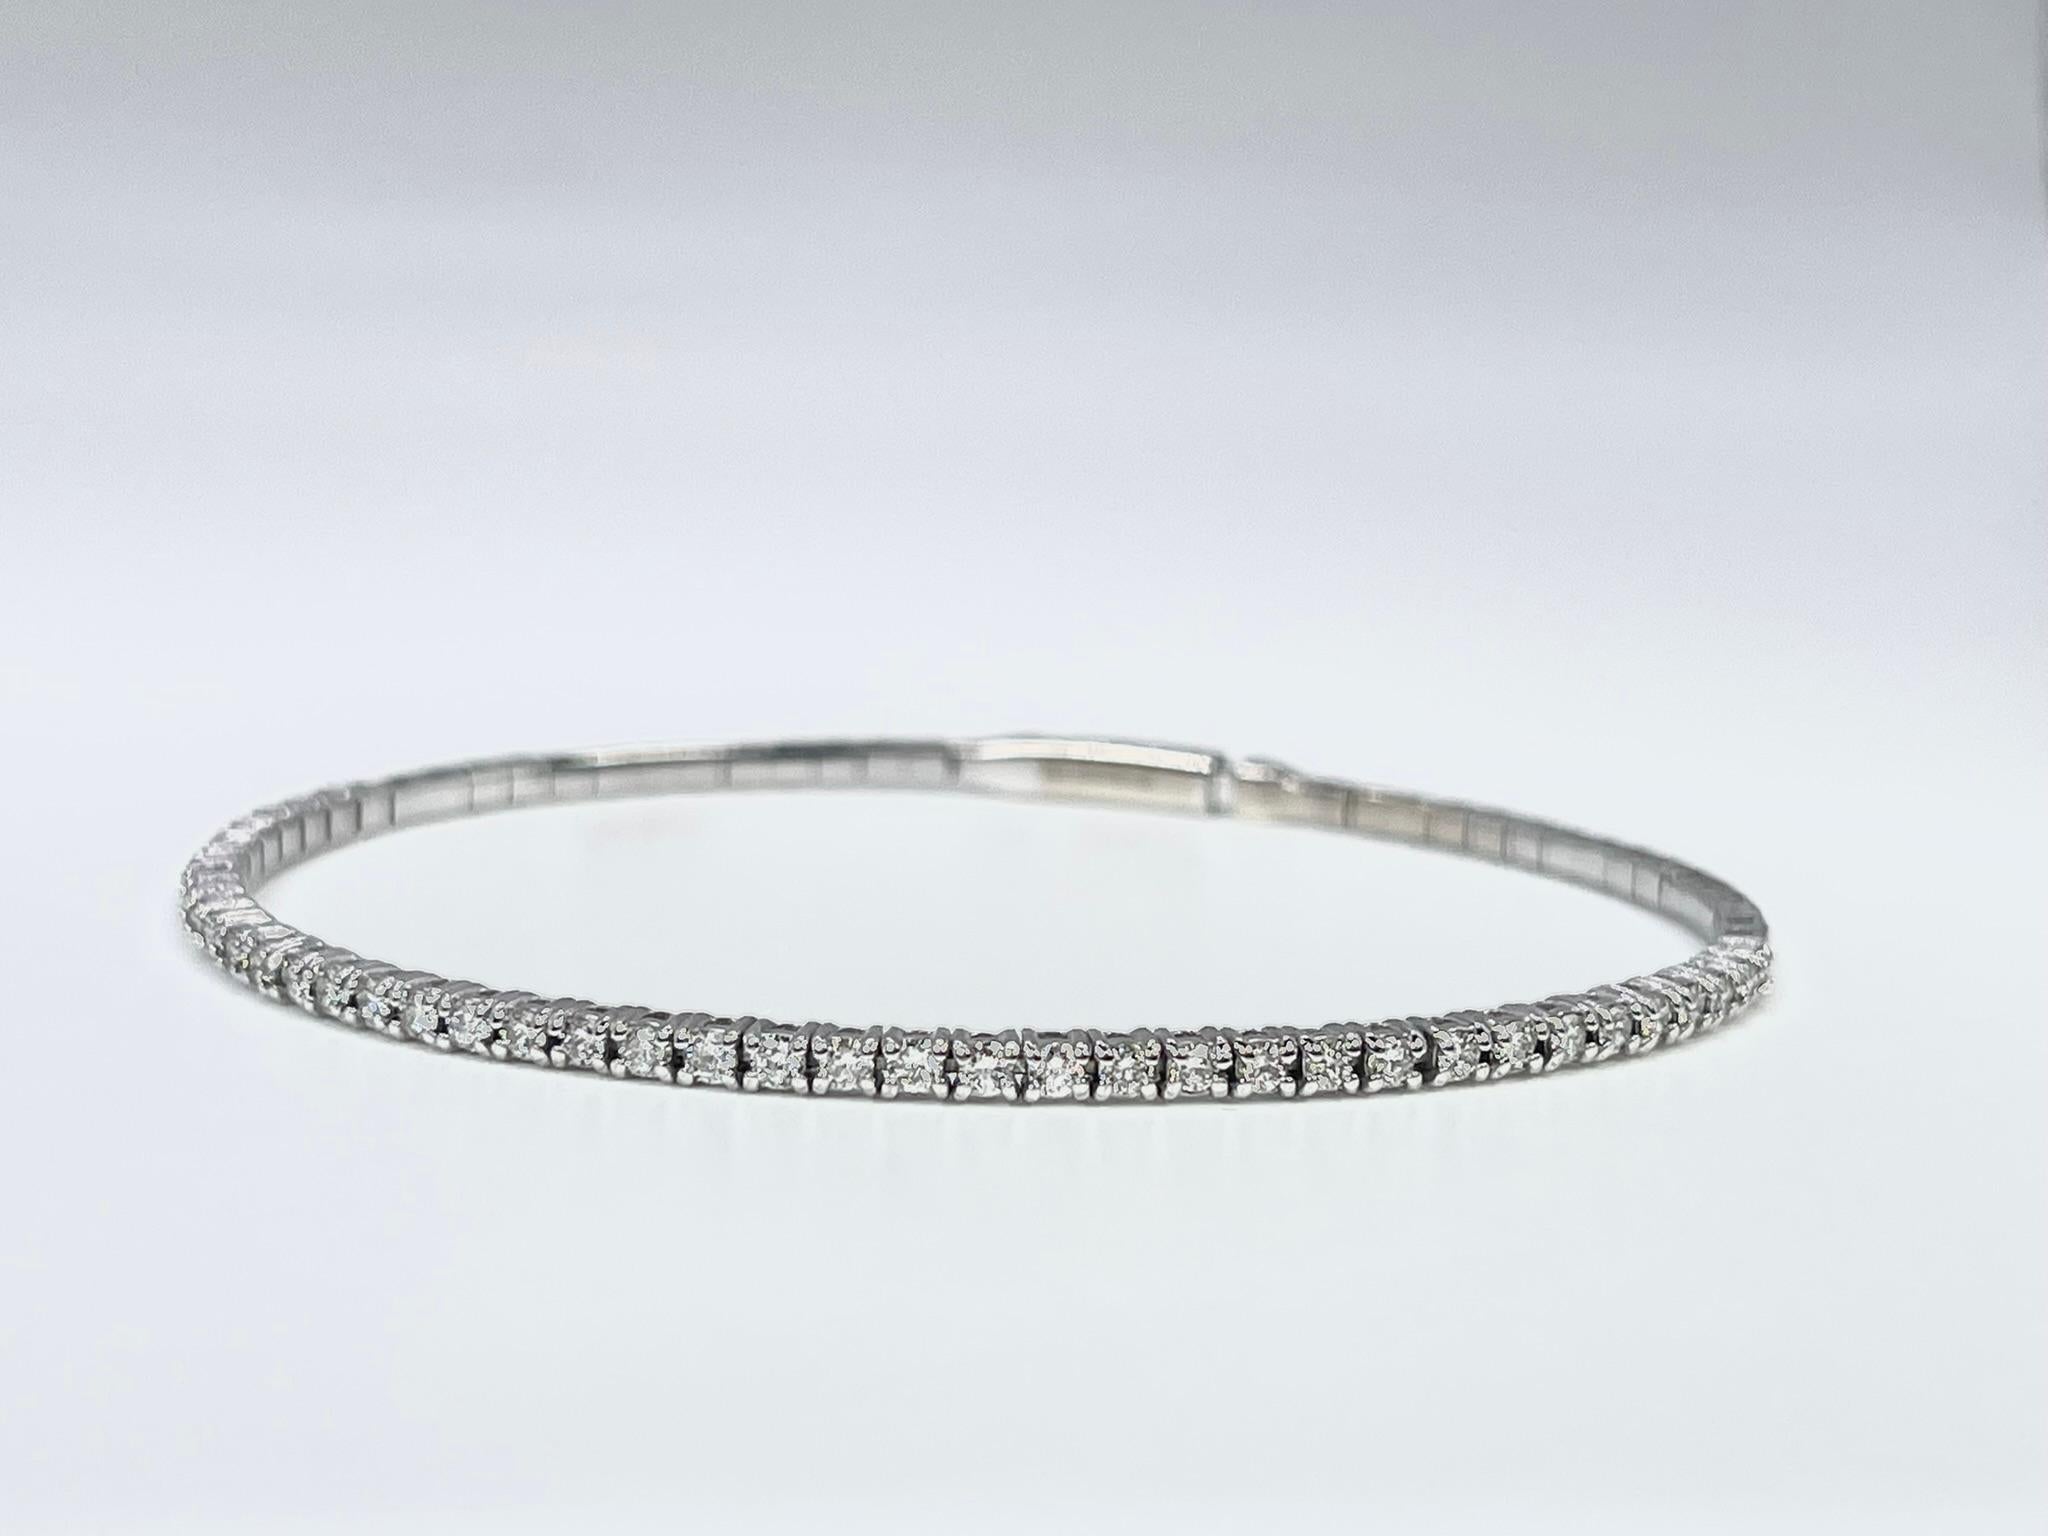 Diamond Bangle bracelet in 14KT white gold, the bangle bracelet is flexible and very comfortable when on the hand.

GRAM WEIGHT: 6.10gr
METAL: 14KT white gold

NATURAL DIAMOND(S)
Cut: Round Brilliant
Color: F-G 
Clarity: VS-SI 
Carat: 1ct
Length: